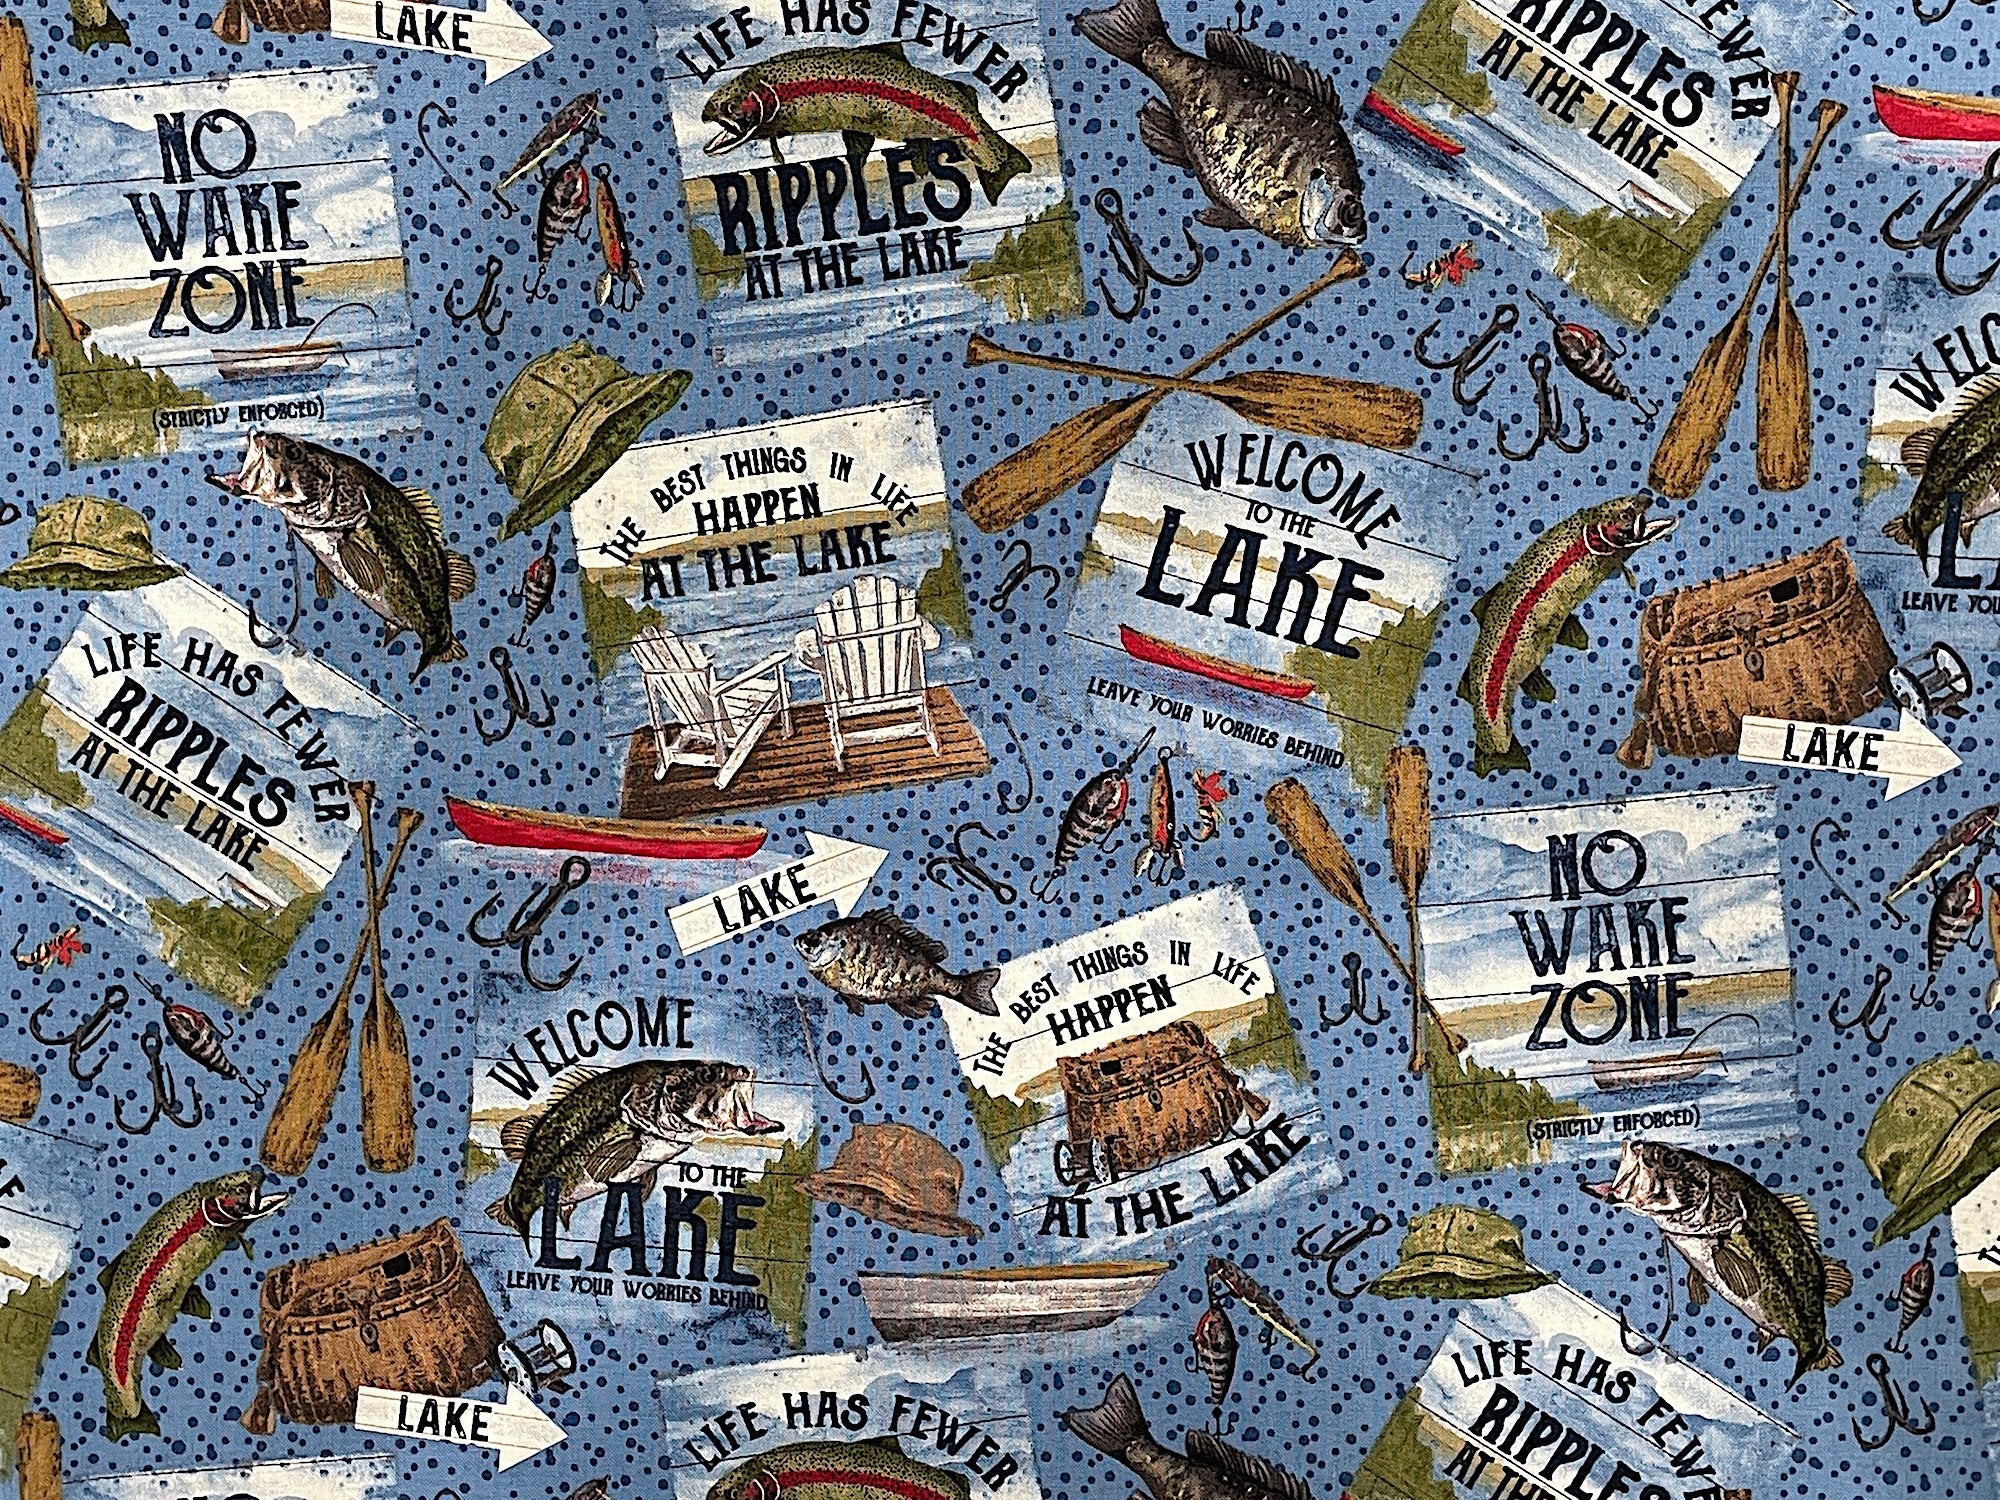 This fabric is part of the At the Lake collection from Riley Blake. This blue fabric is covered with fishing signs, fish, boats and more. Some of the sayings on the signs are Welcome to the Lake Leave Your Worries Behind, the Best Things happen at the lake and more